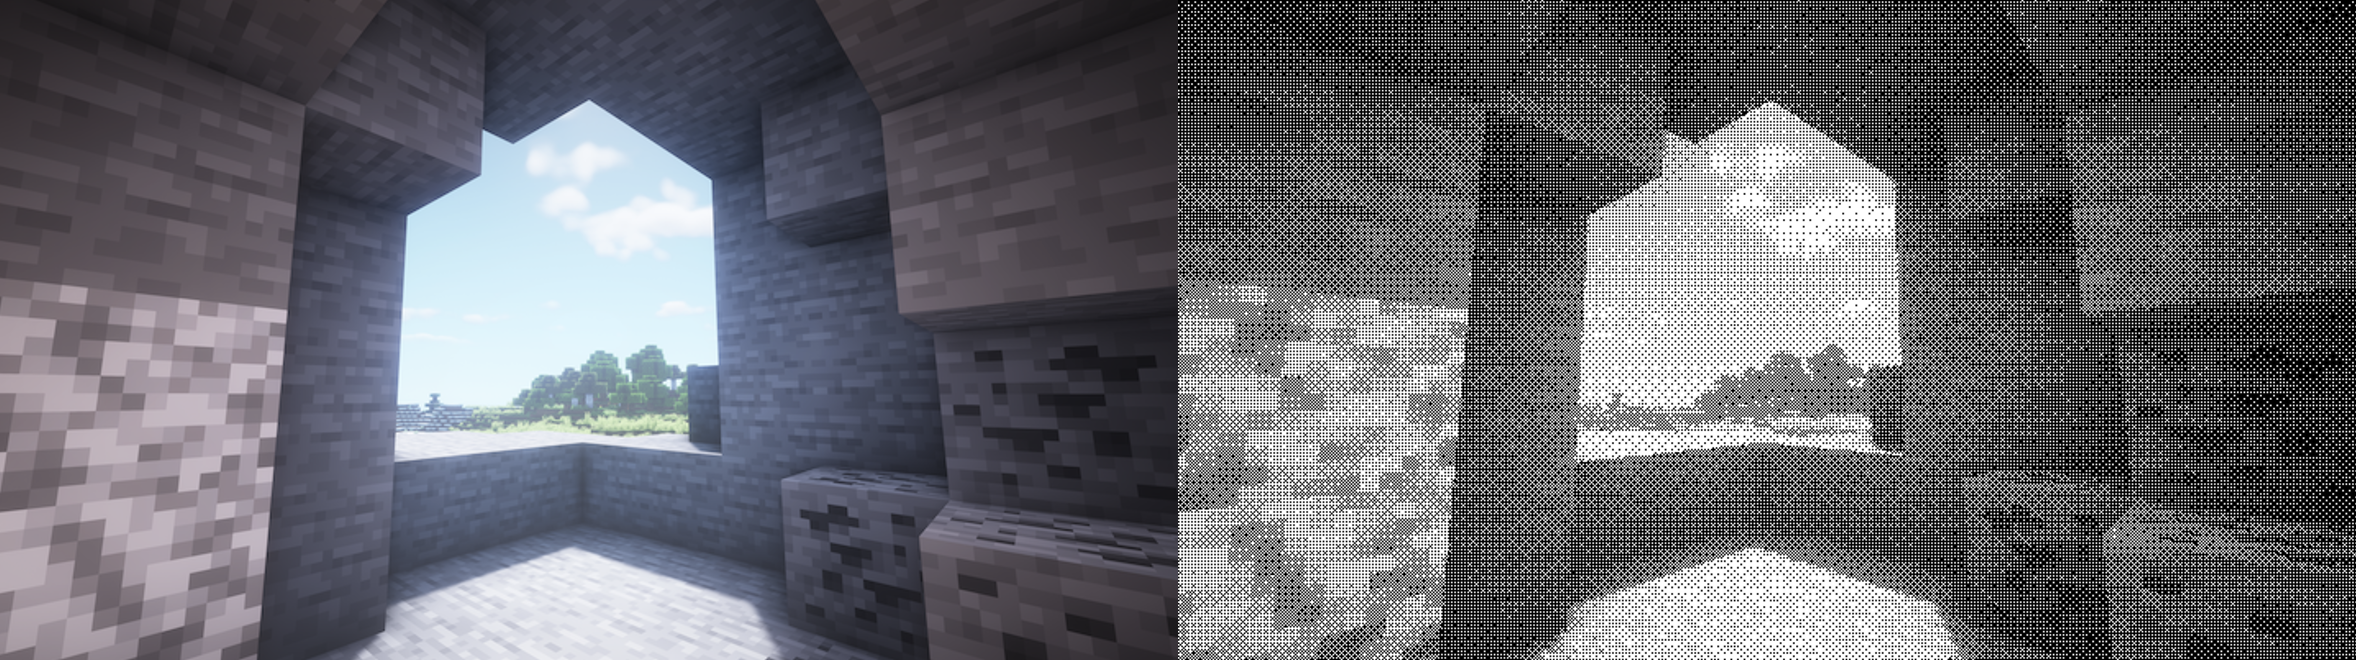 A screenshot of the video game Minecraft, showing a cave and its dithered form